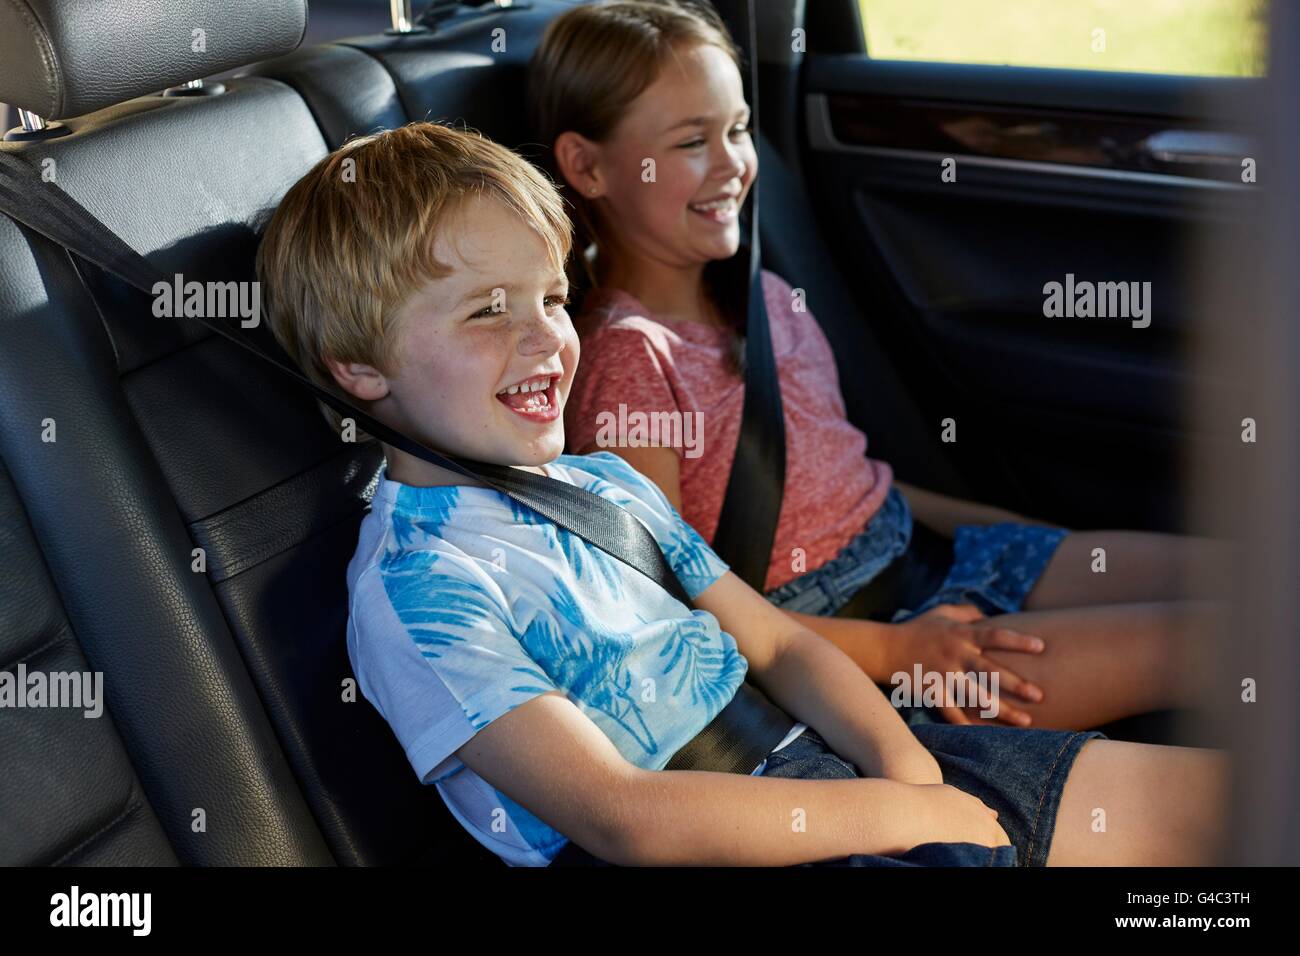 MODEL RELEASED. Brother and sister in the back seat of the car wearing seat belts. Stock Photo